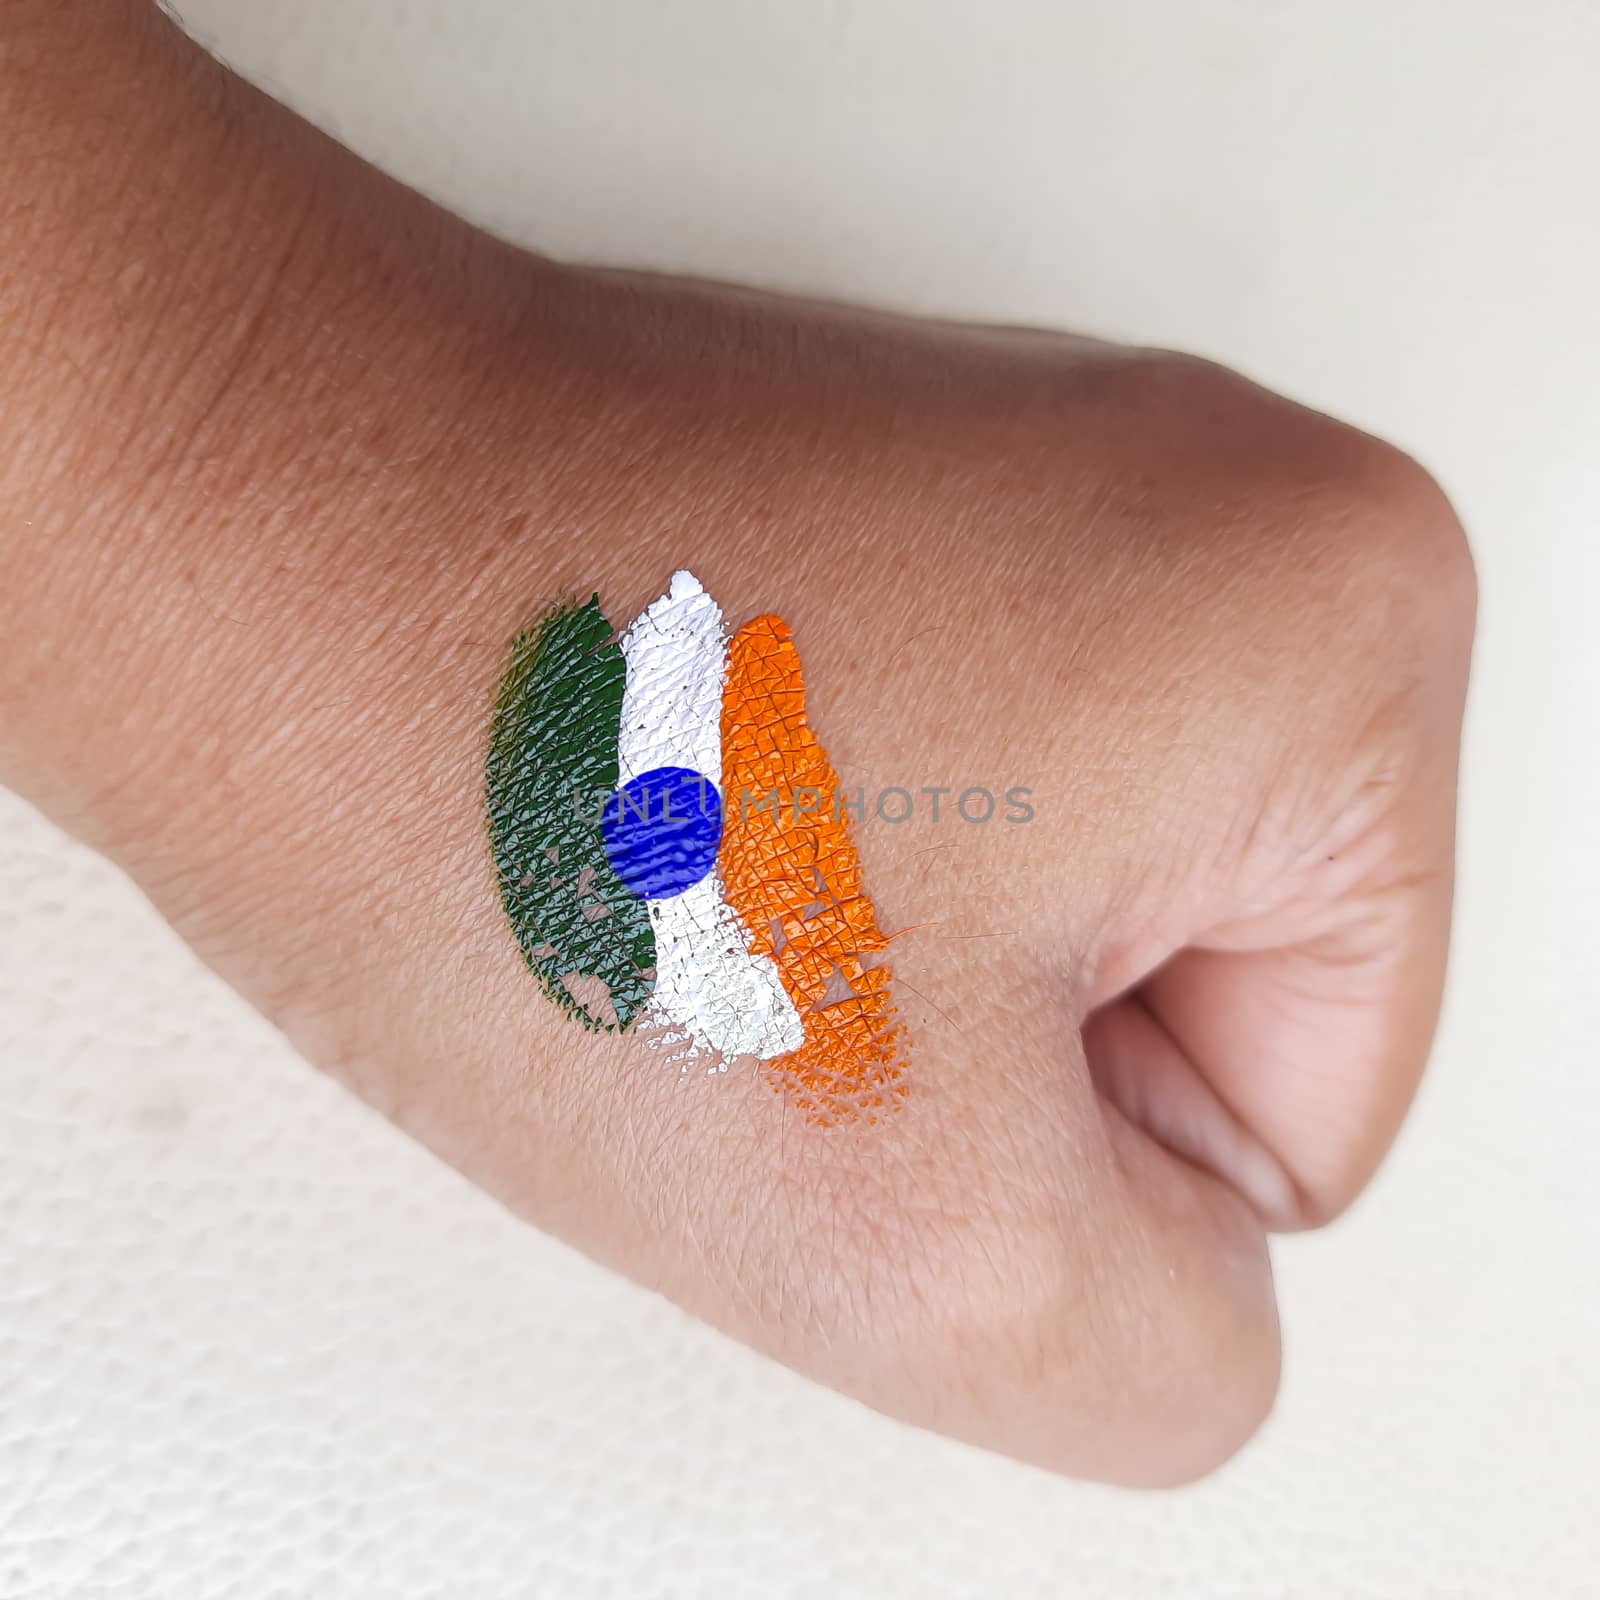 Indian flag painted in hand for independence day celebration